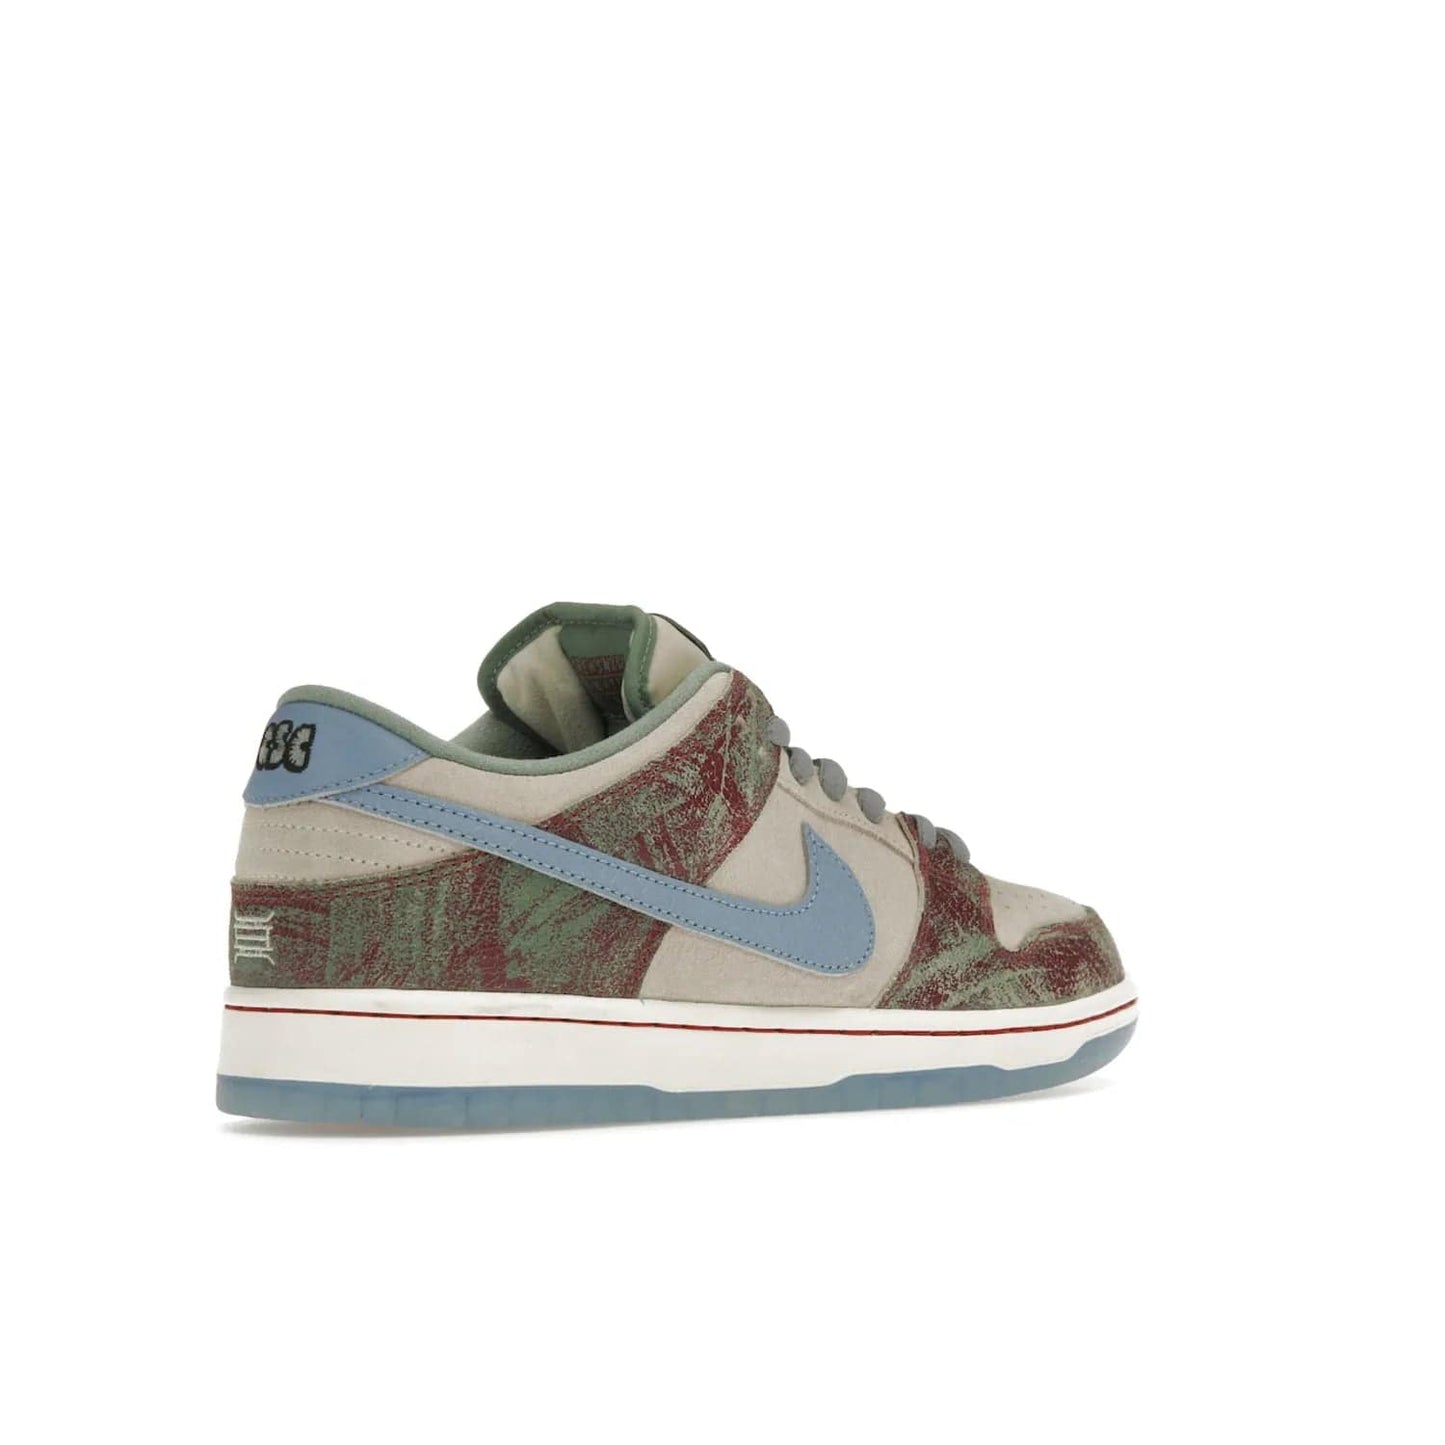 Nike SB Dunk Low Crenshaw Skate Club - Image 33 - Only at www.BallersClubKickz.com - Introducing the Nike SB Dunk Low Crenshaw Skate Club! Classic skate shoes with Sail and Light Blue upper, Cedar accents, padded collars and superior grip for comfortable, stable performance and style. Ideal for any skate session.